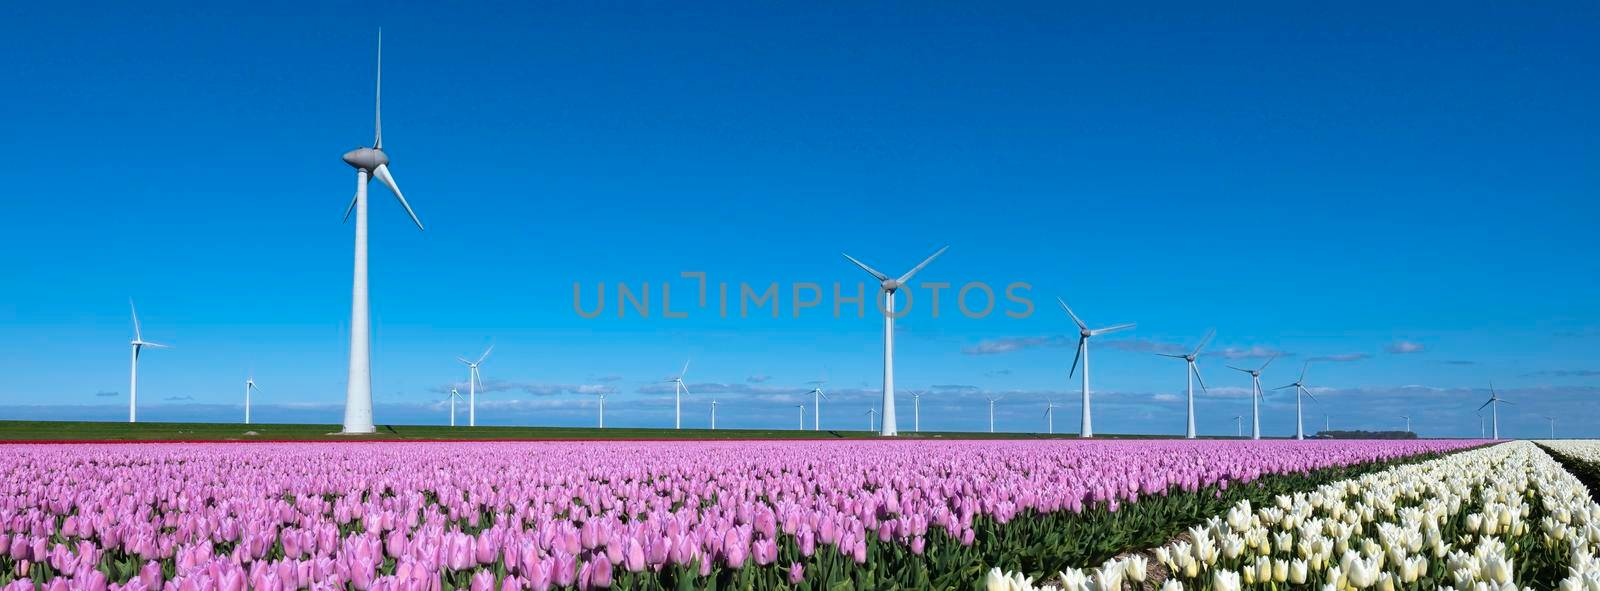 field with pink and white tulips near wind turbines in holland under blue sky by ahavelaar